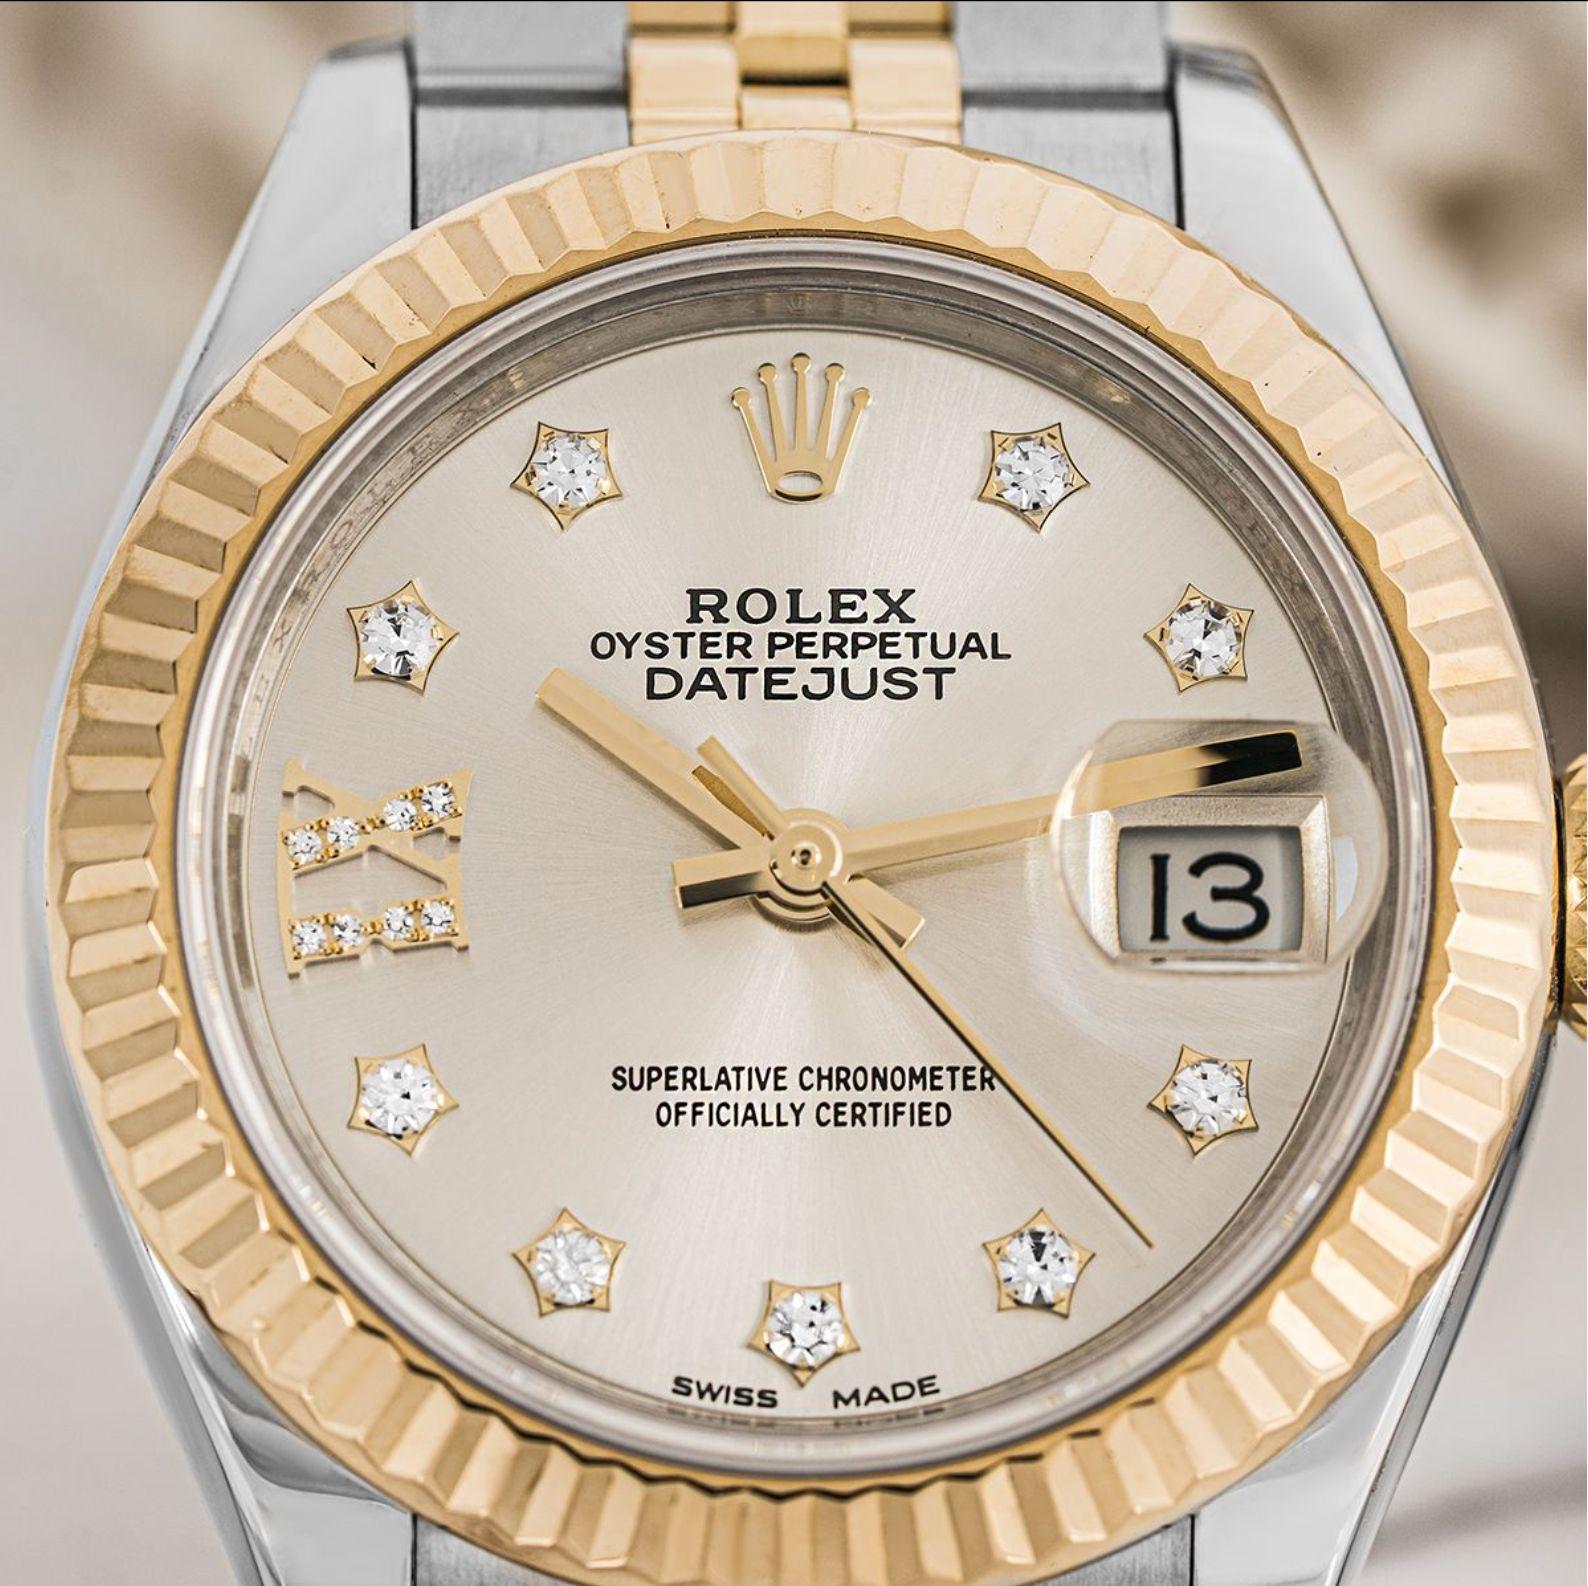 A 28mm stainless steel and yellow gold Datejust by Rolex. Featuring a silver dial with diamond set hour markers and a fixed fluted yellow gold bezel. Fitted with a sapphire glass and a self-winding automatic movement. The watch is also equipped with